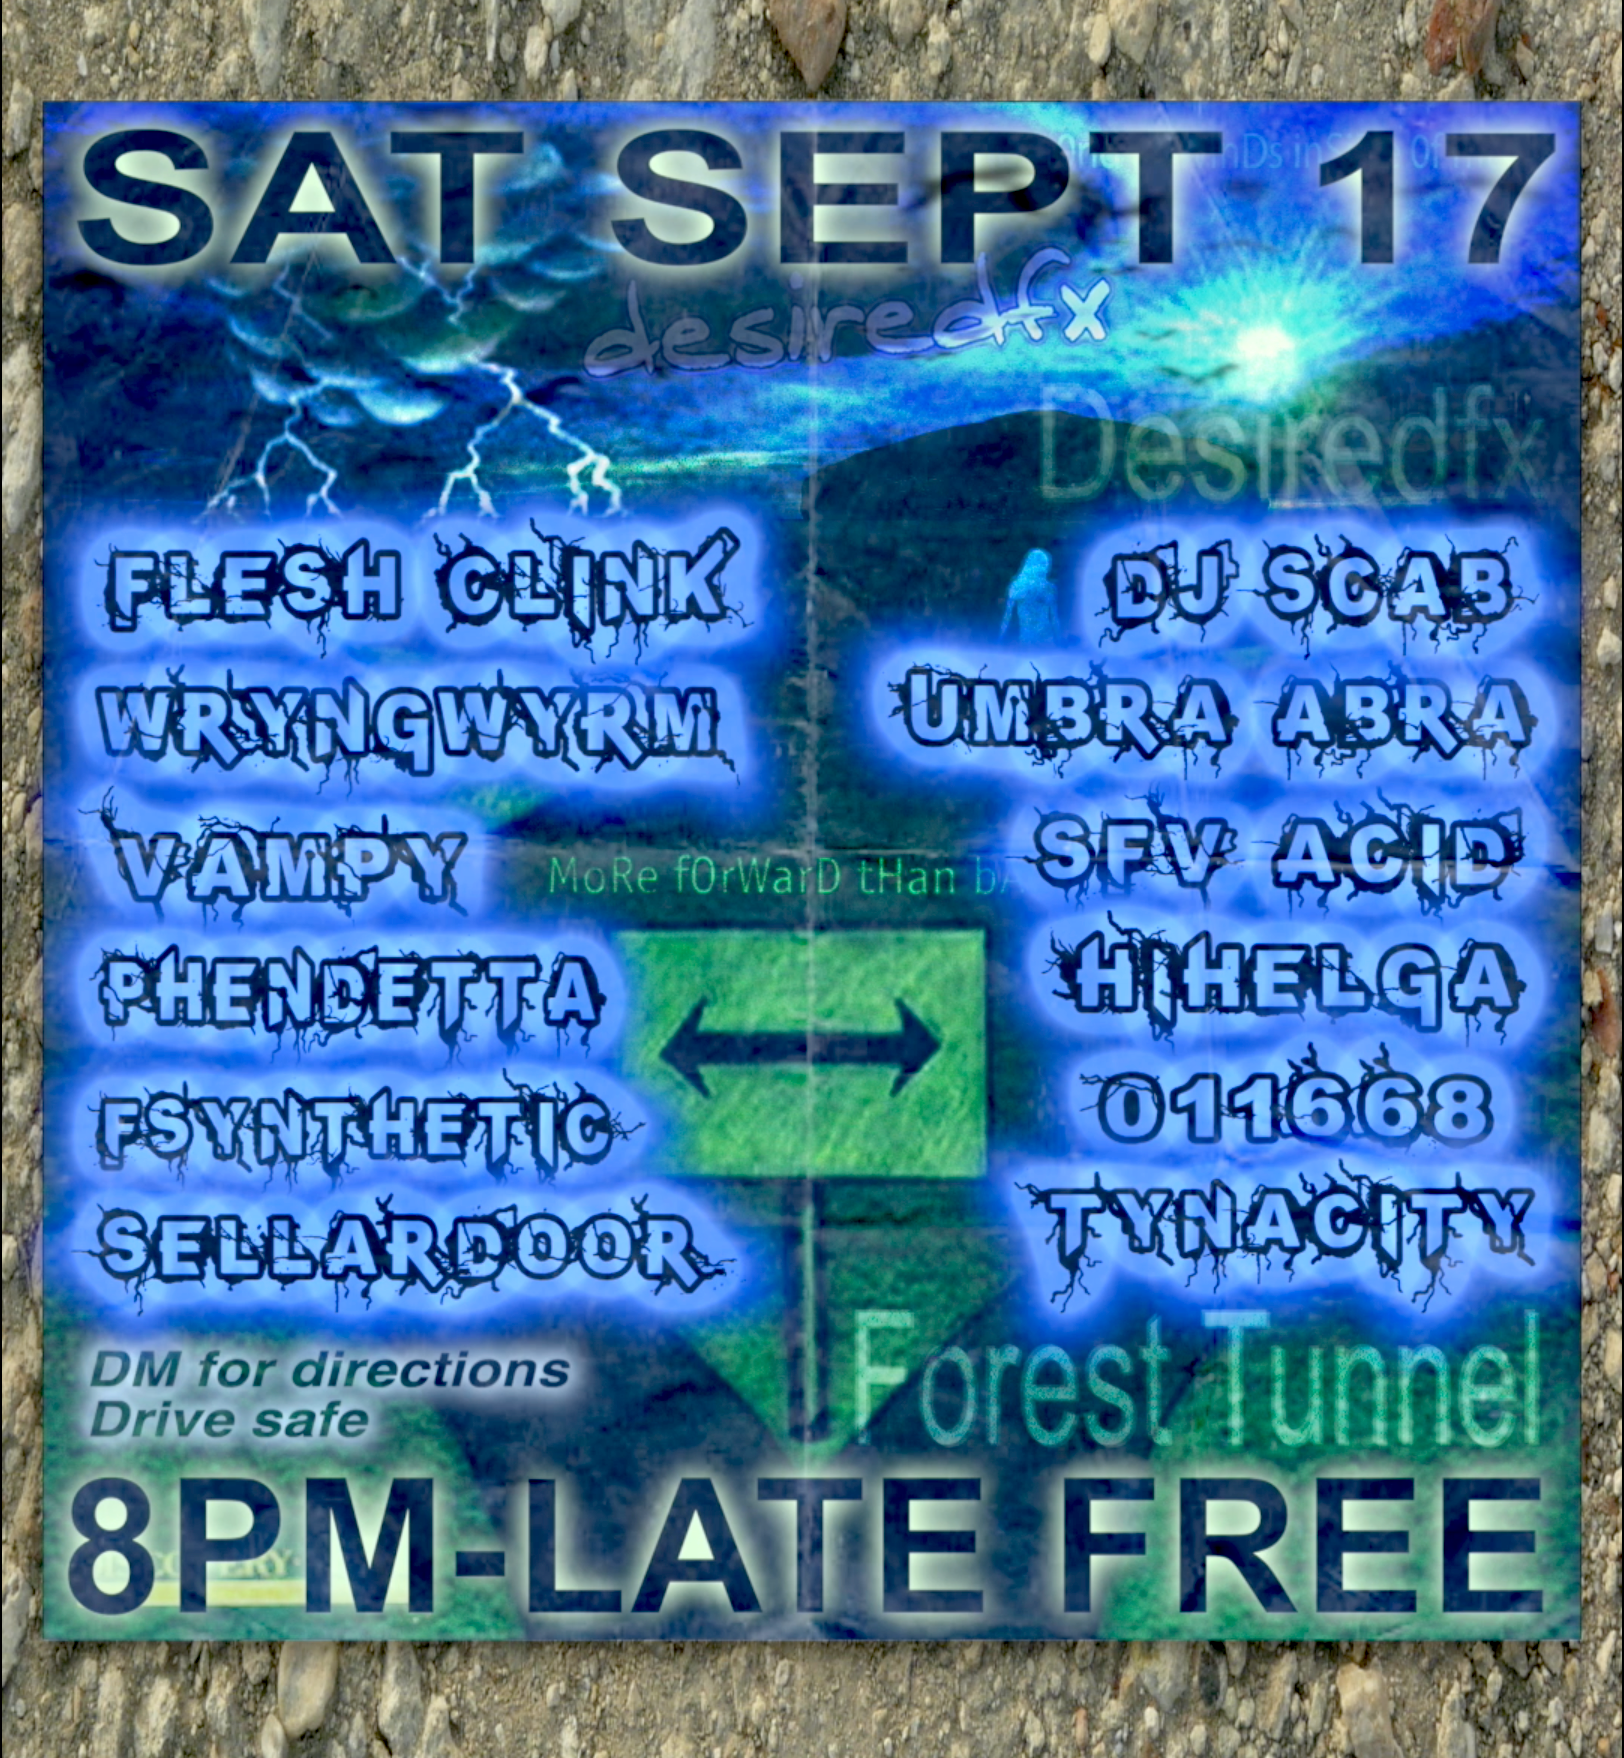 desiredfx FREE RAVE mountain forest tunnel - フライヤー表